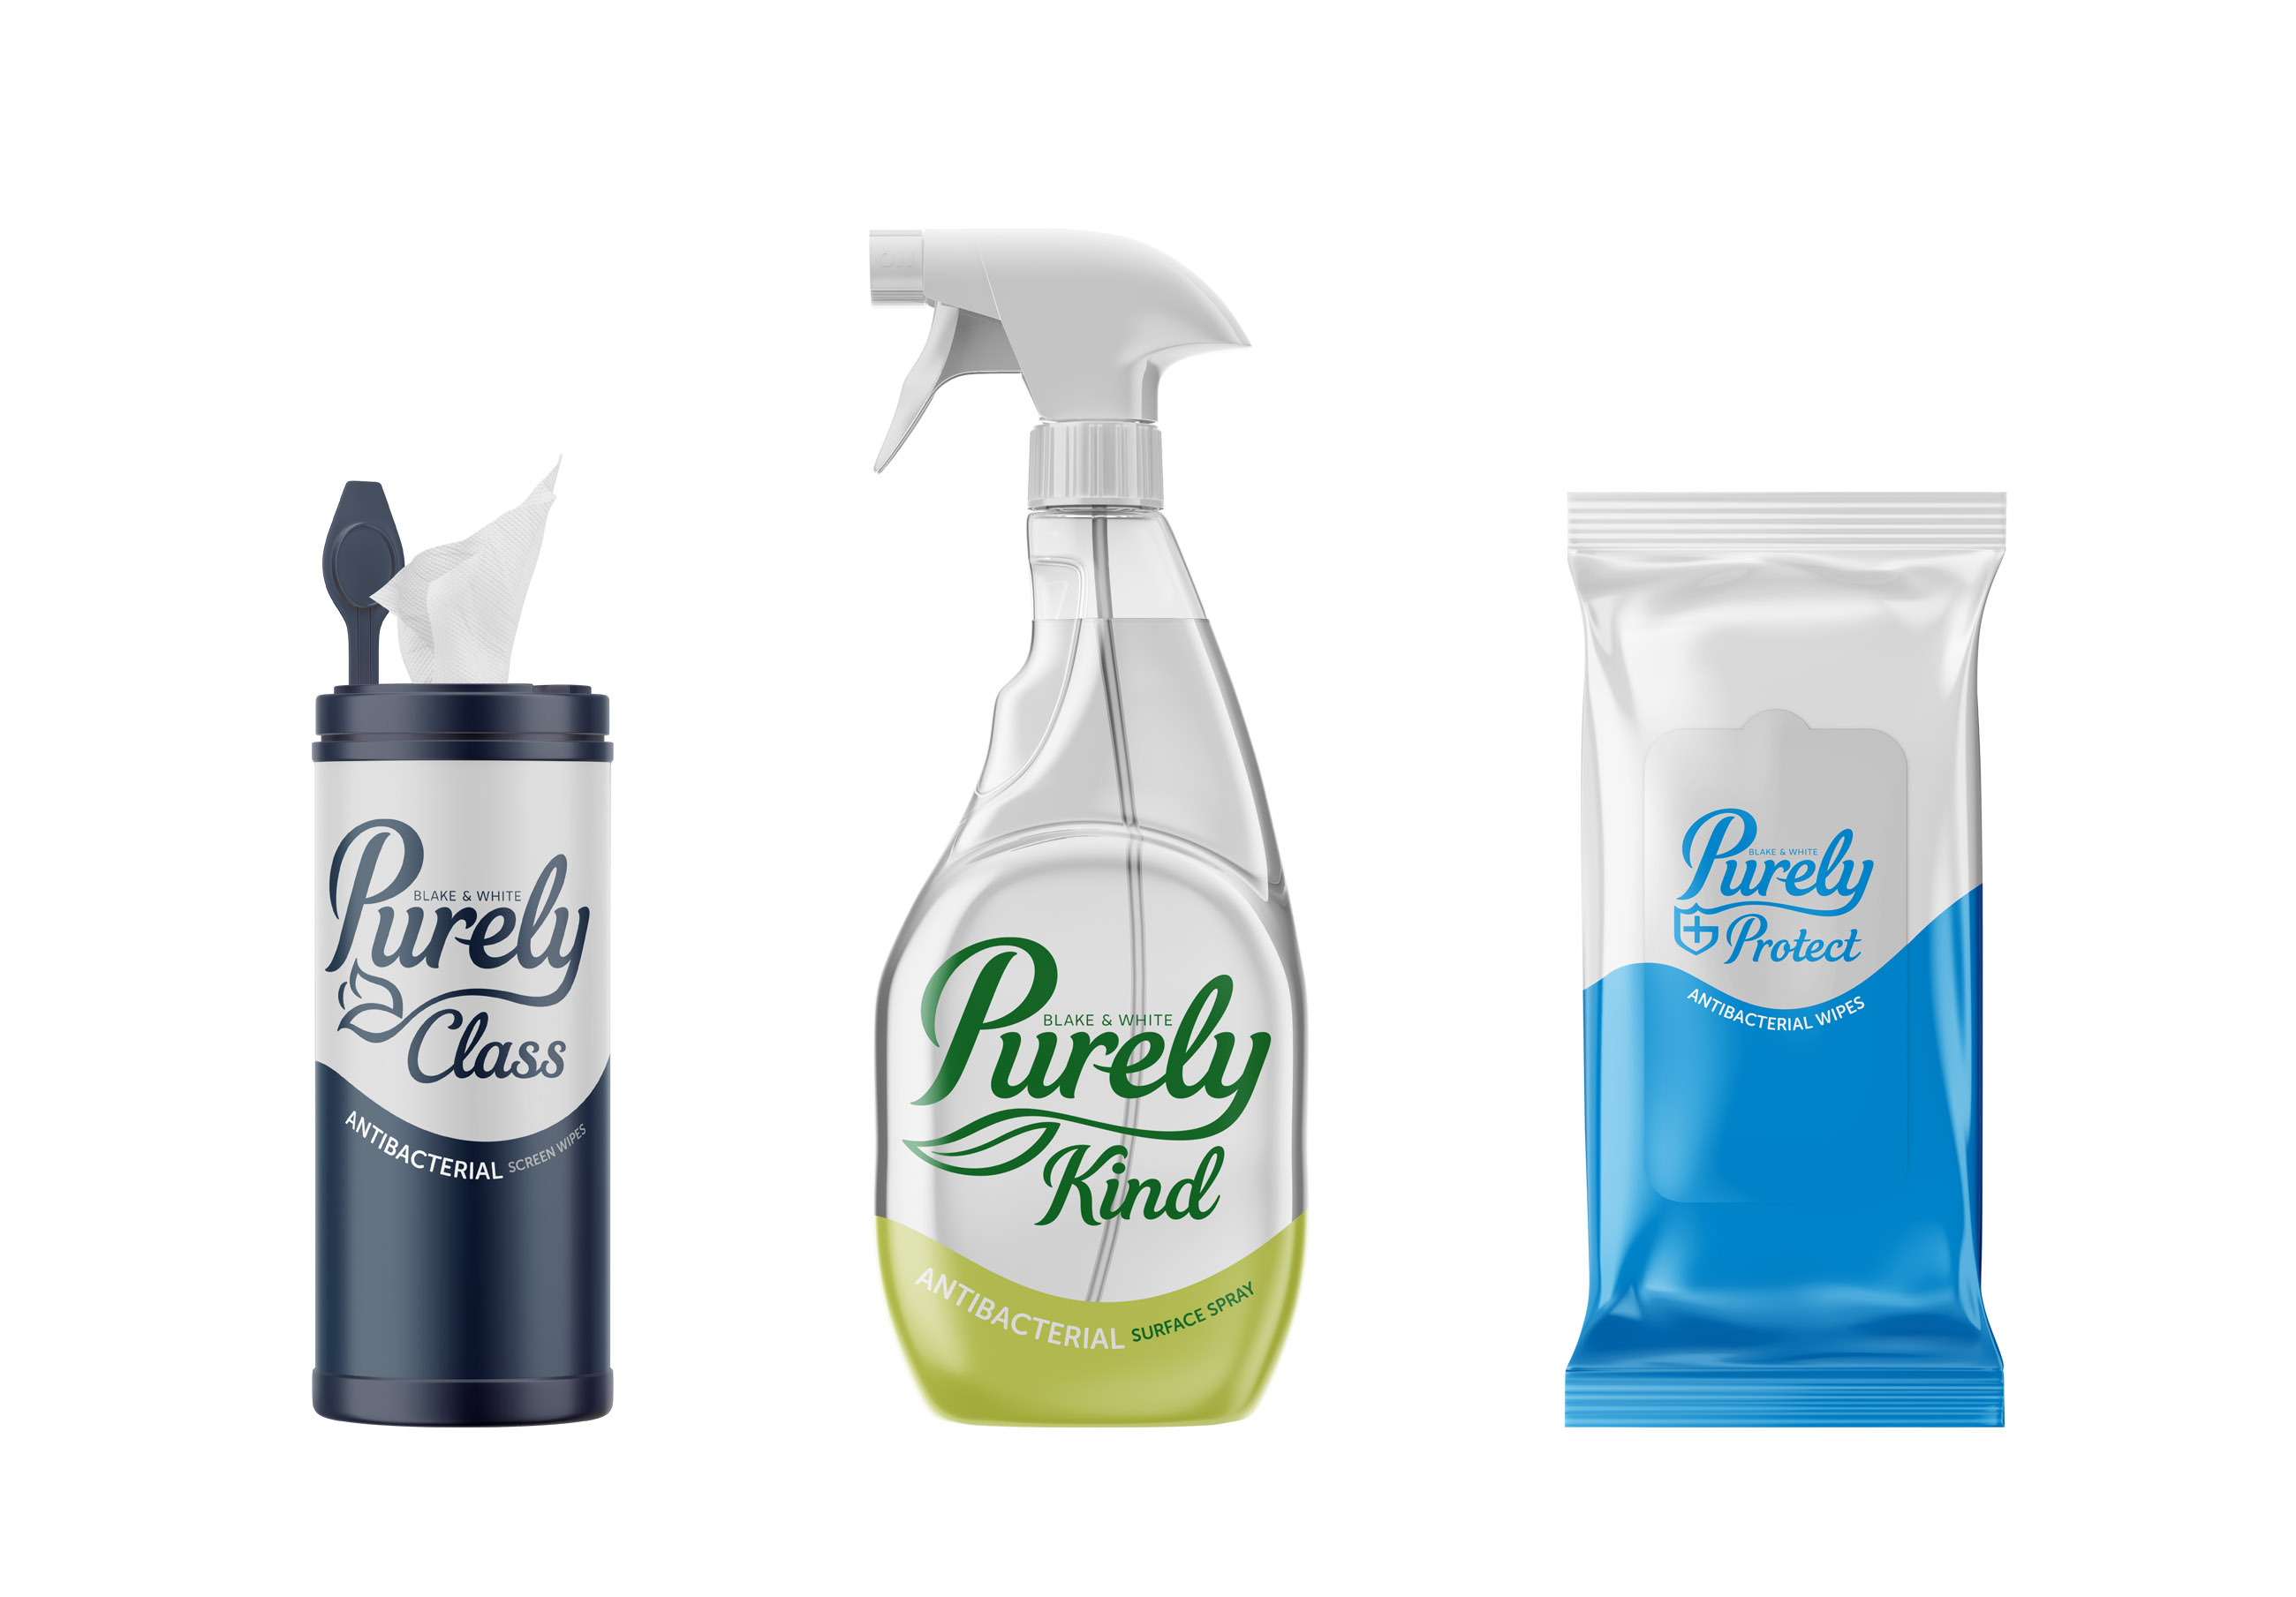 Packaging and Brand Design for Purely Janitorial Products by Pencil Studio